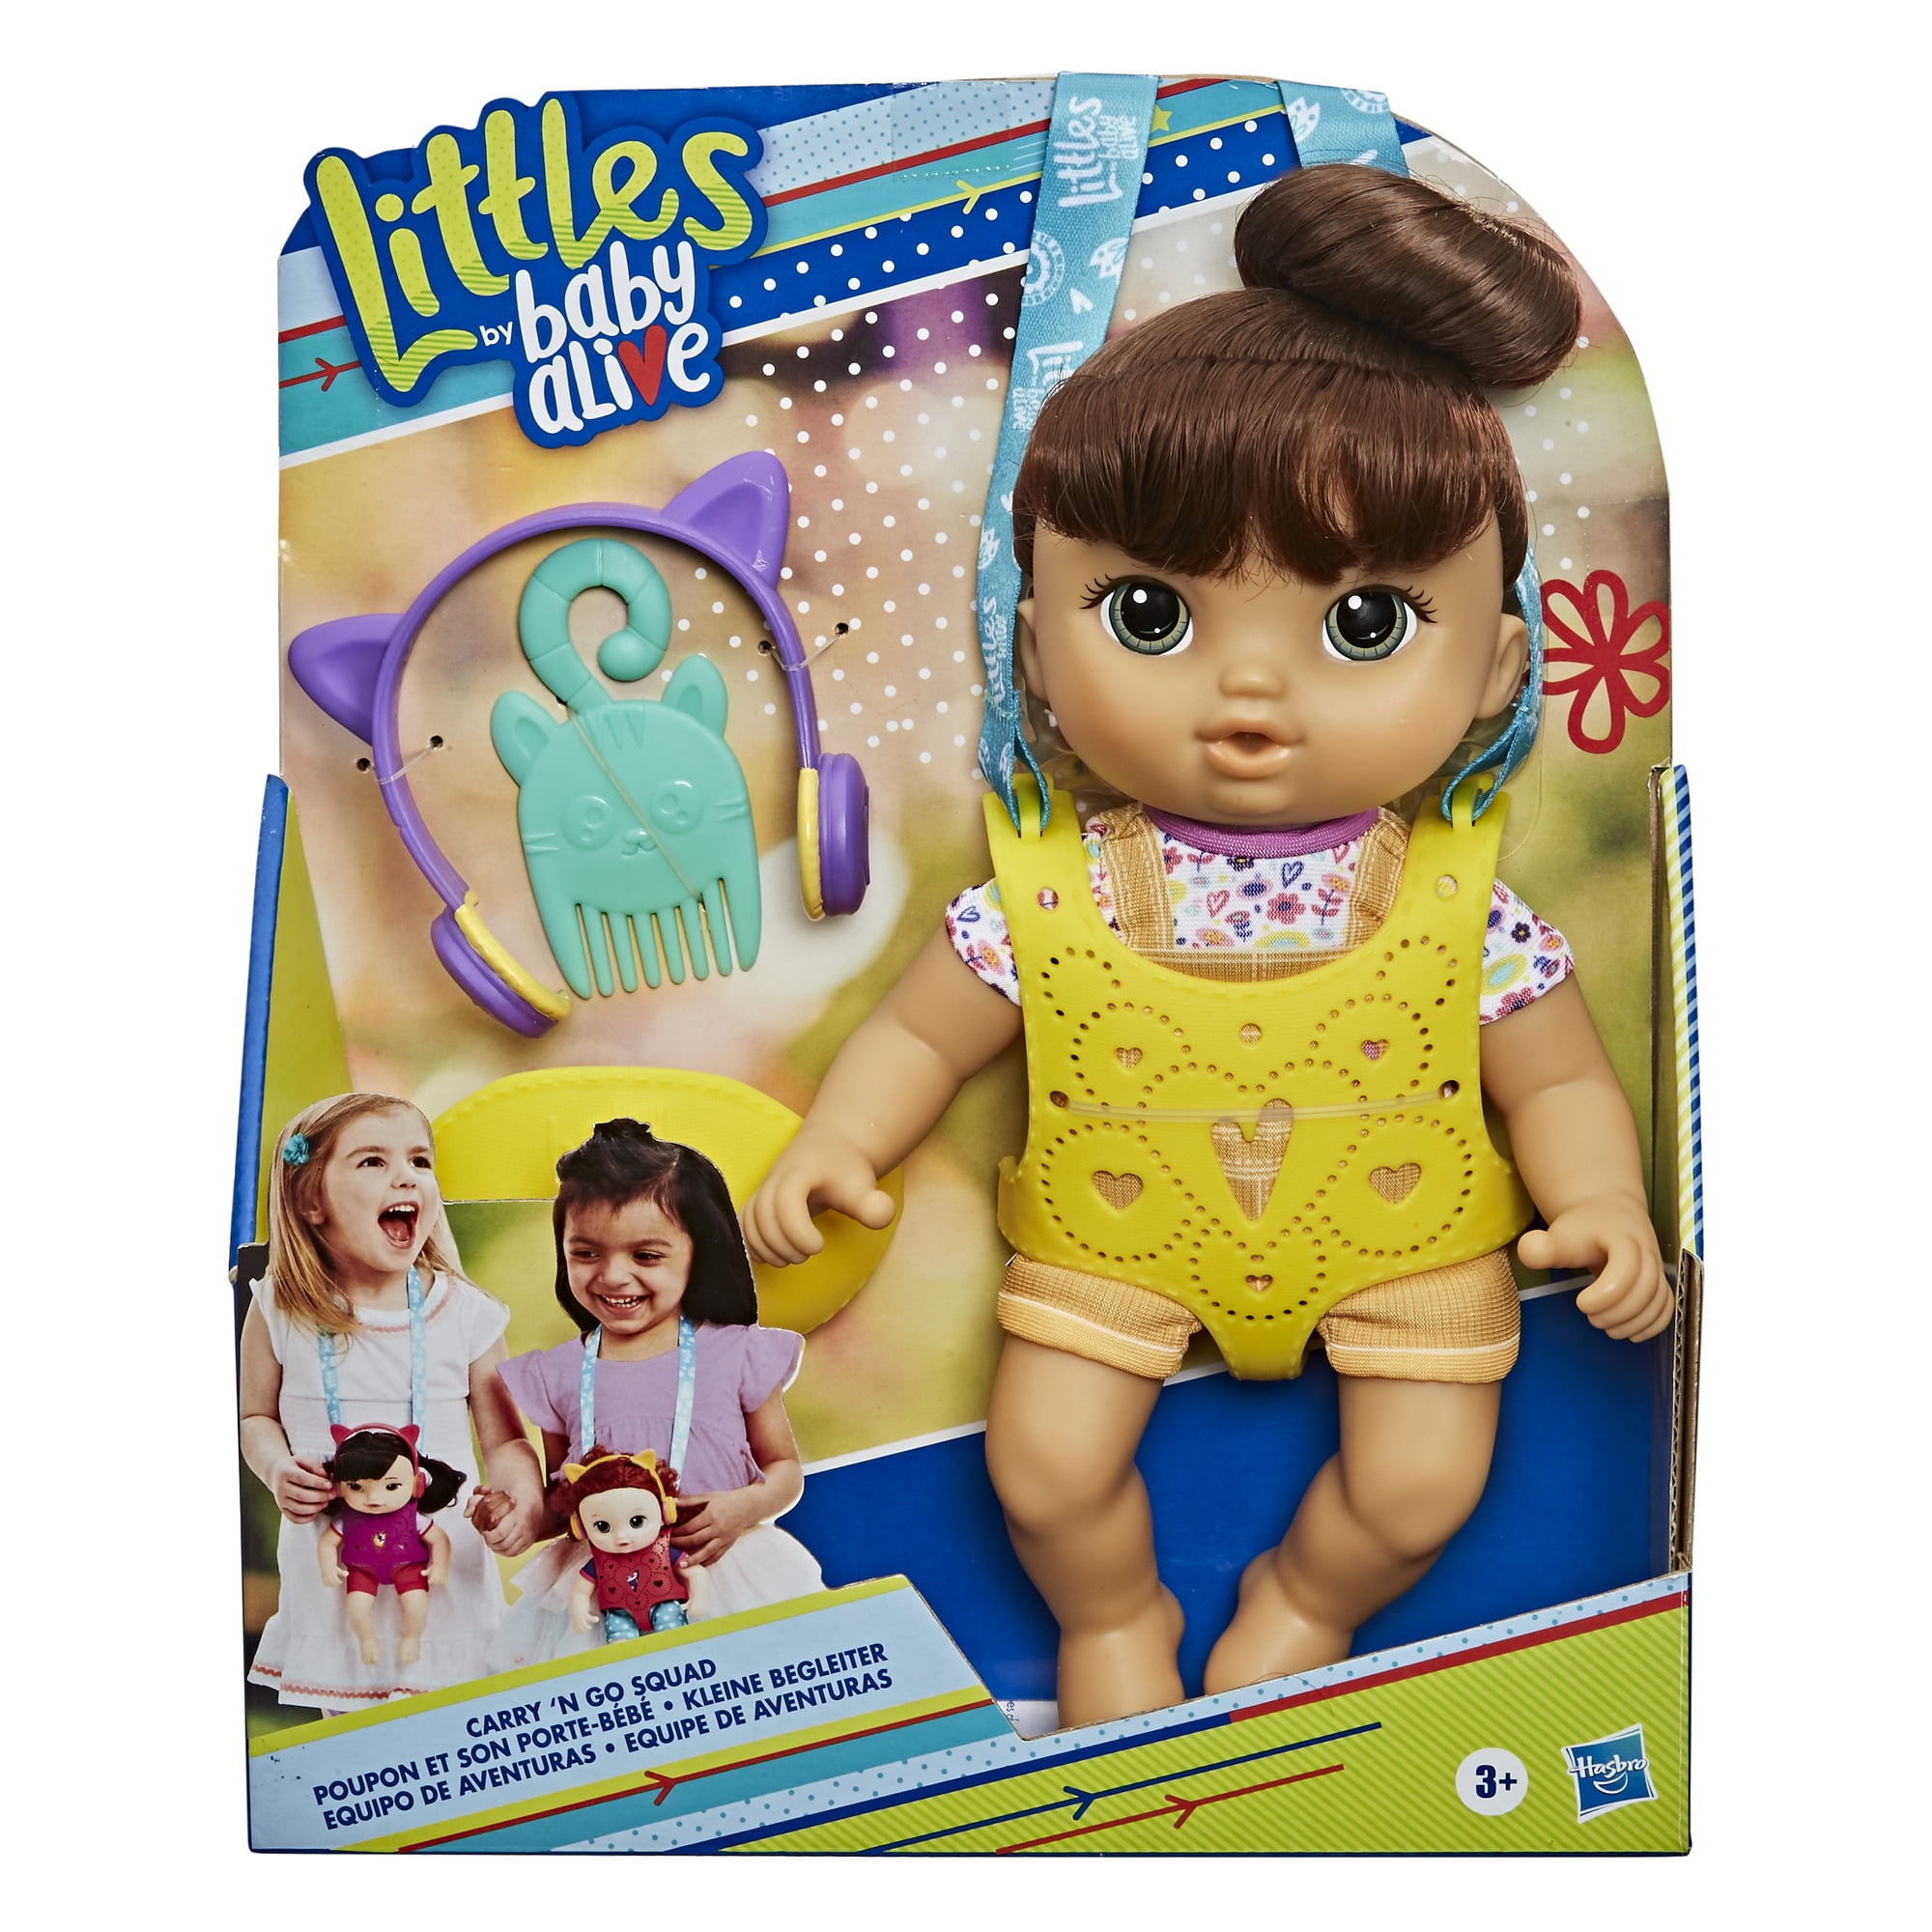 Baby Alive Baby Grows Up 14 inch Doll E8198 for sale online 